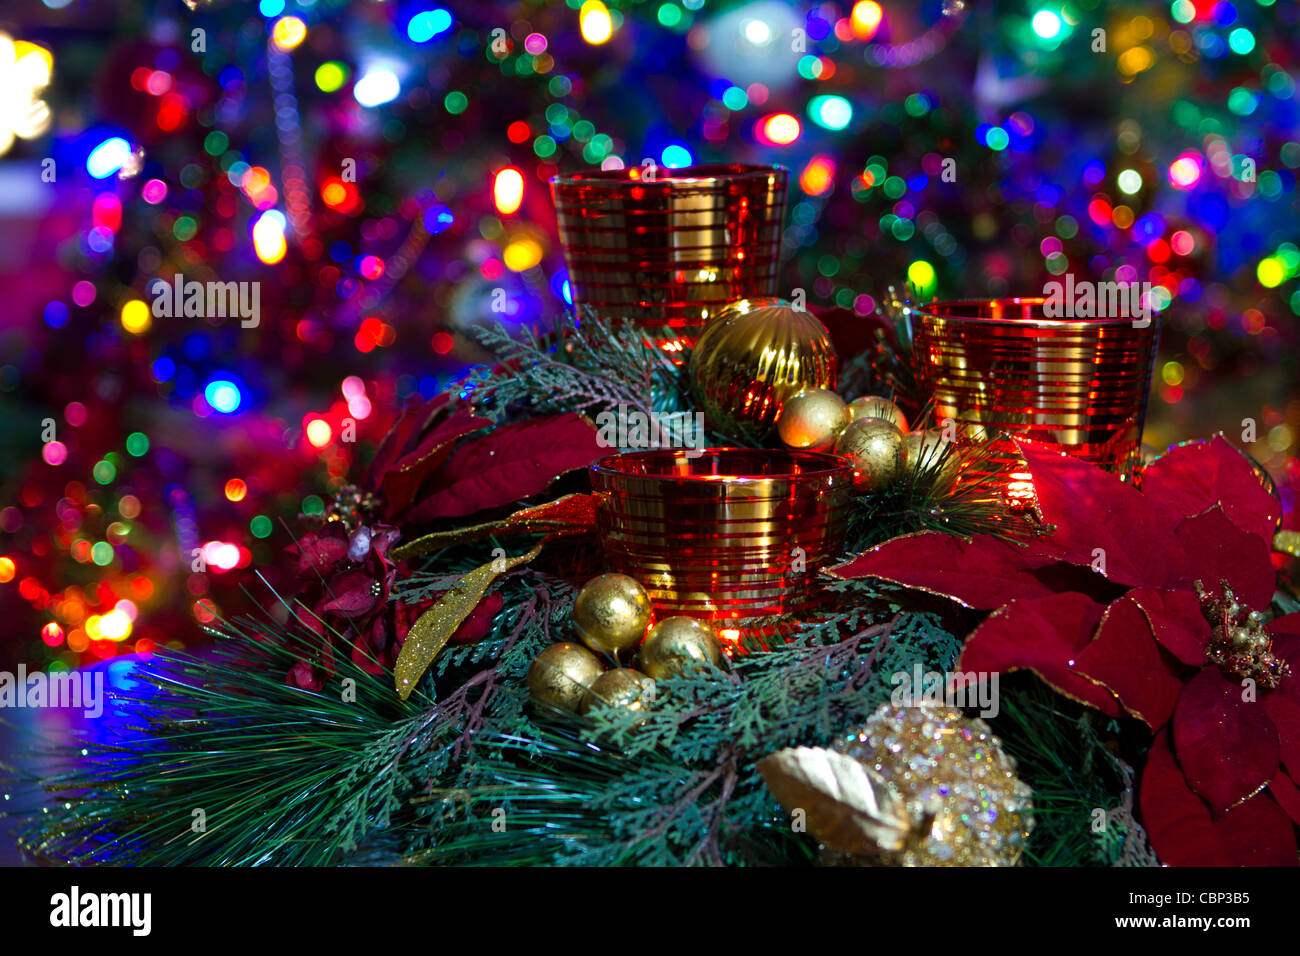 centerpiece Candle set a front of Christmas tree lights Stock Photo